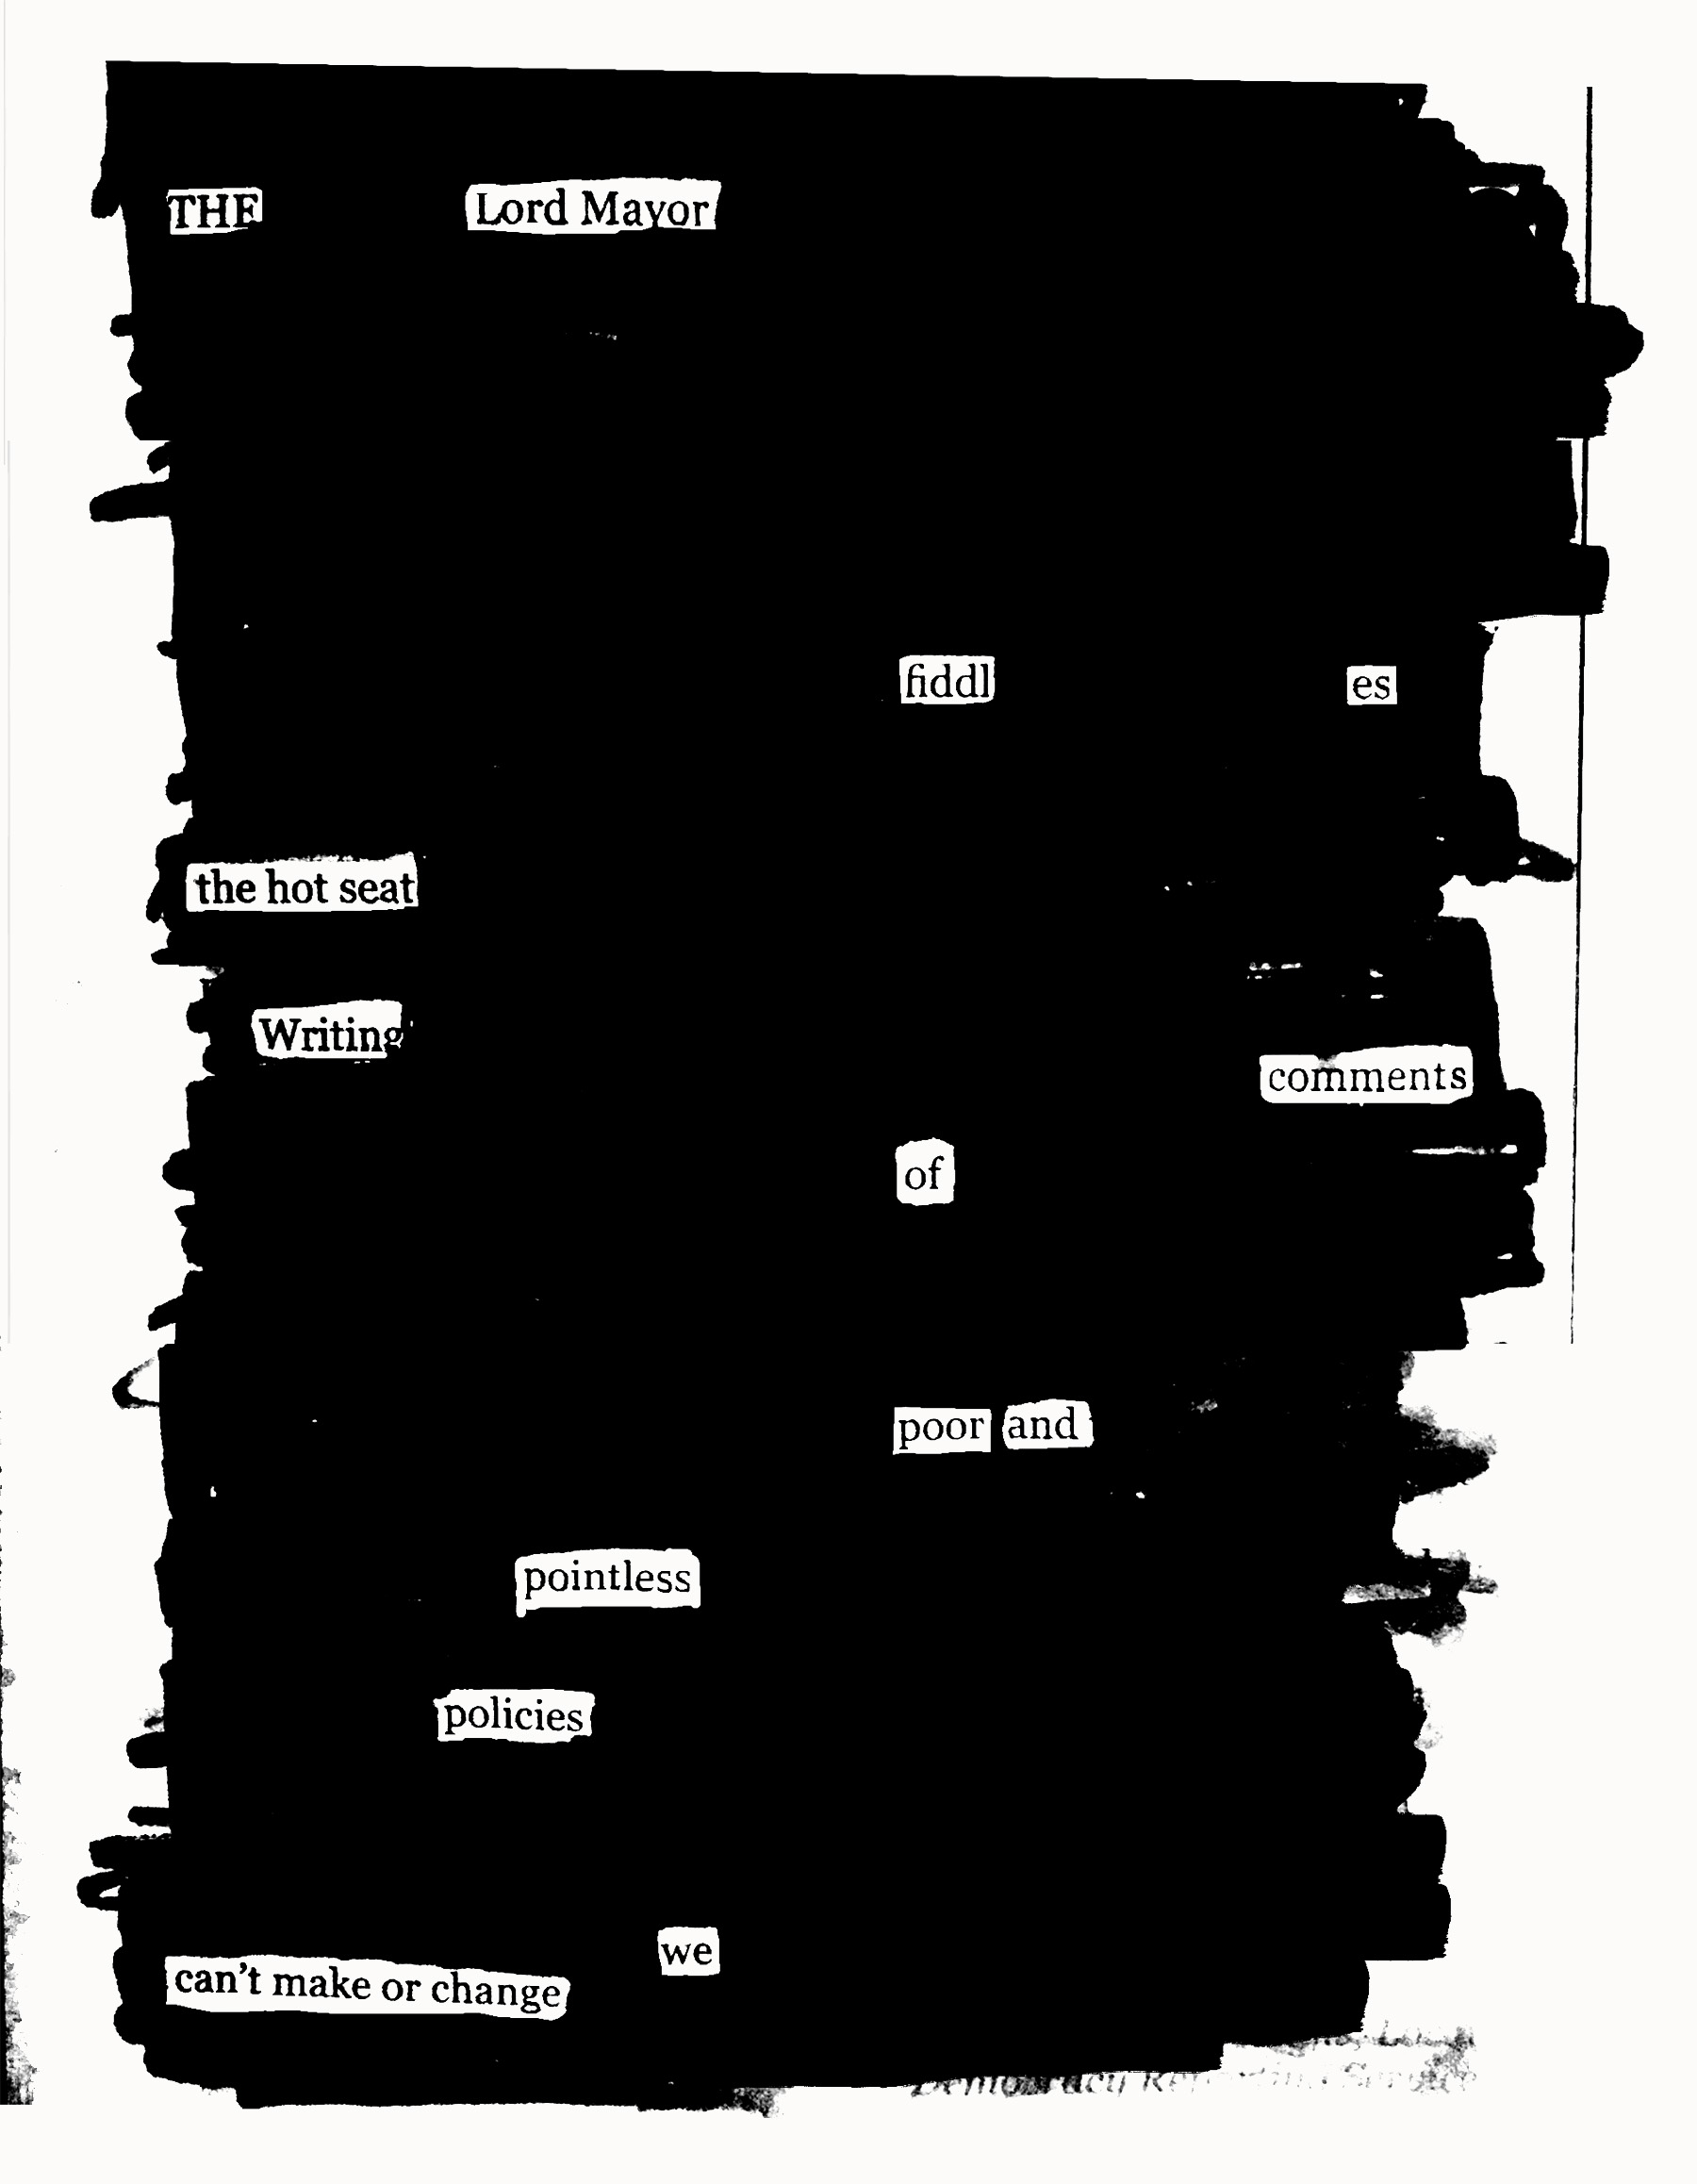 Blackout Poem titled The Lord Mayor